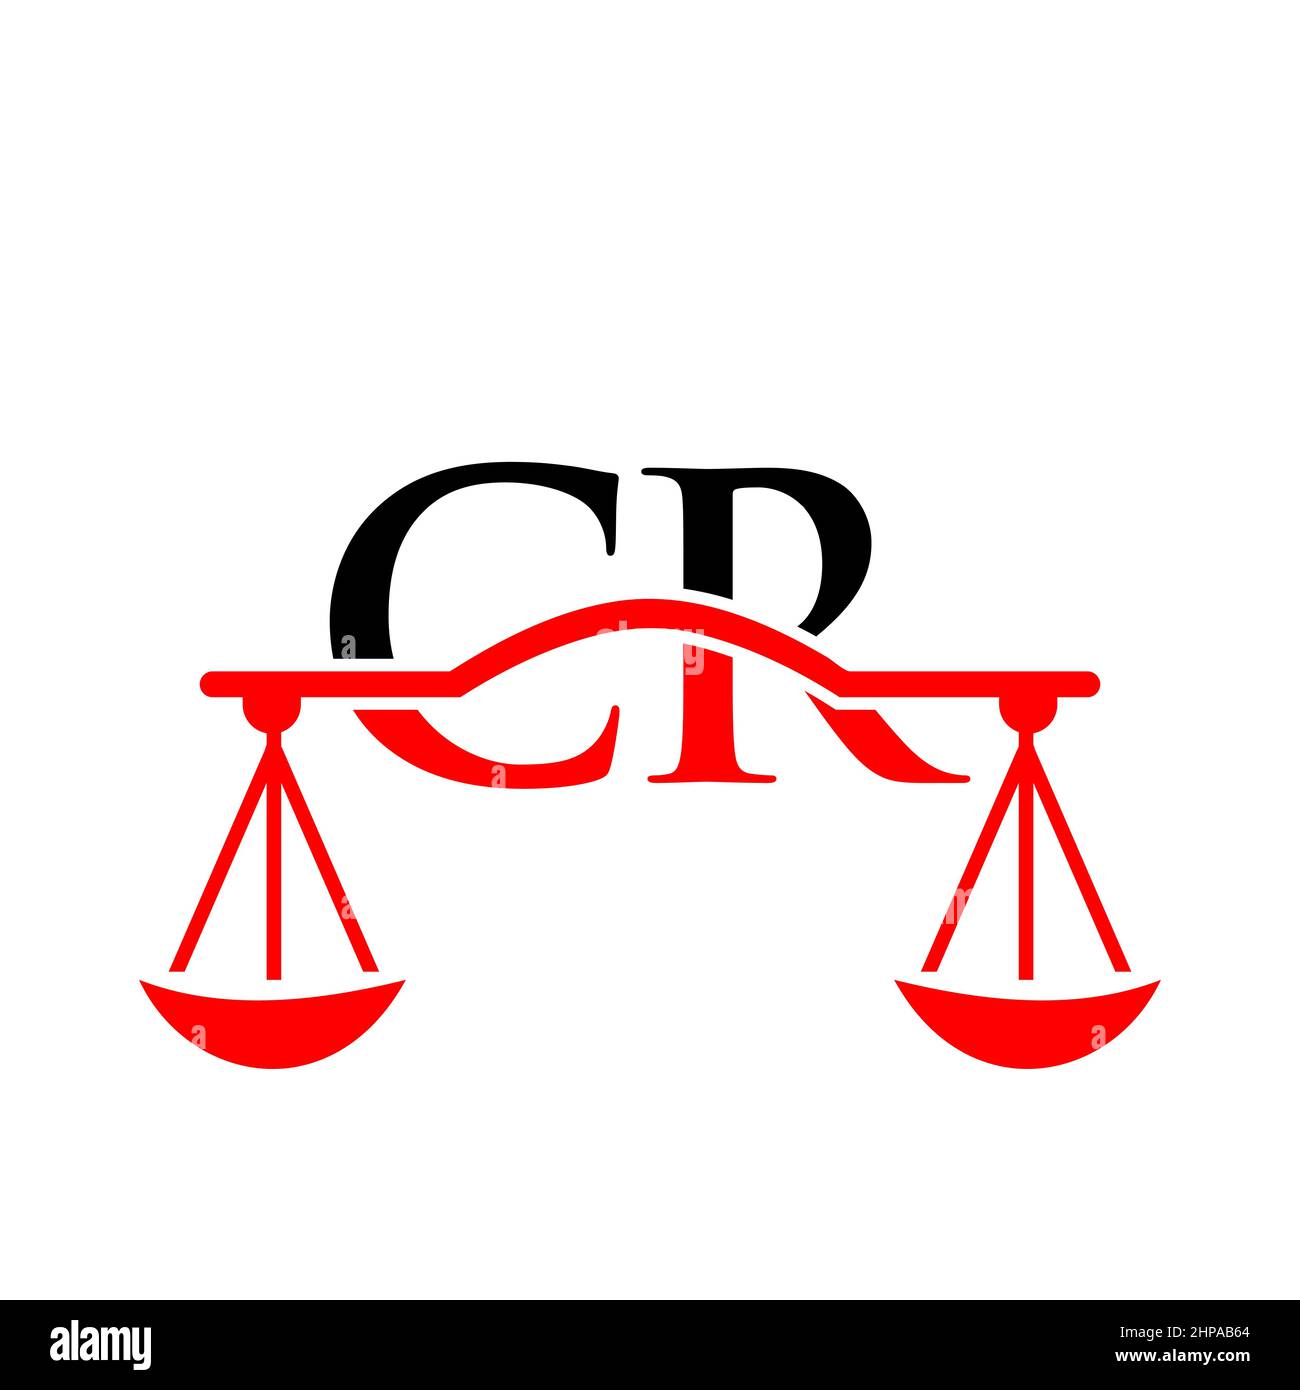 Law Firm Letter CR Logo Design. Lawyer, Justice, Law Attorney, Legal, Lawyer Service, Law Office, Scale. Law Logo On CR Letter Sign Stock Vector